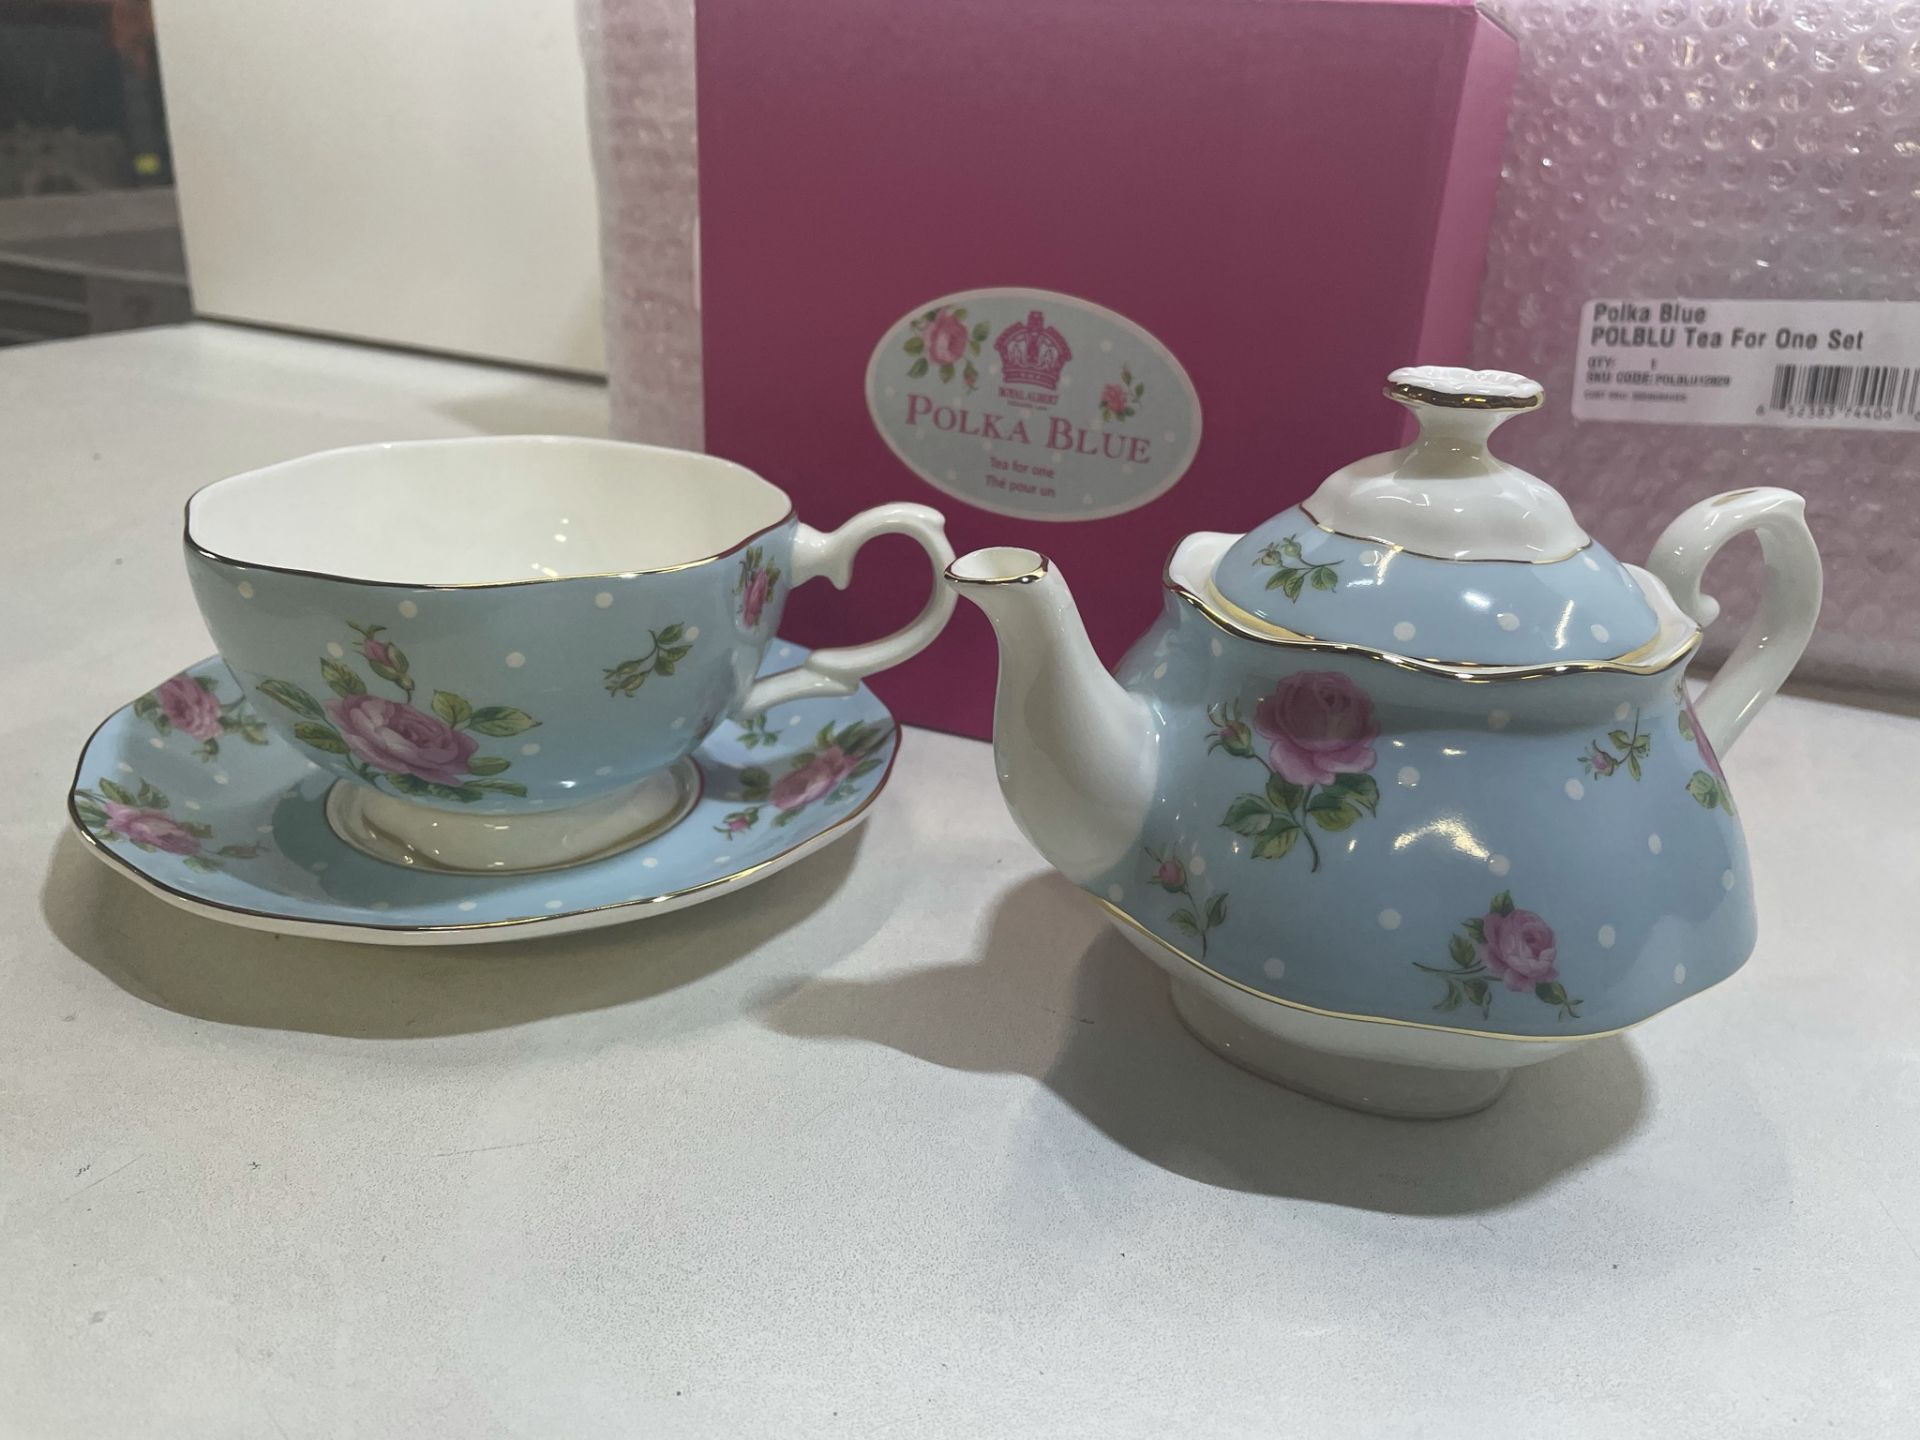 3 x Polka Blue Tea for One Sets in Blue - Image 5 of 5